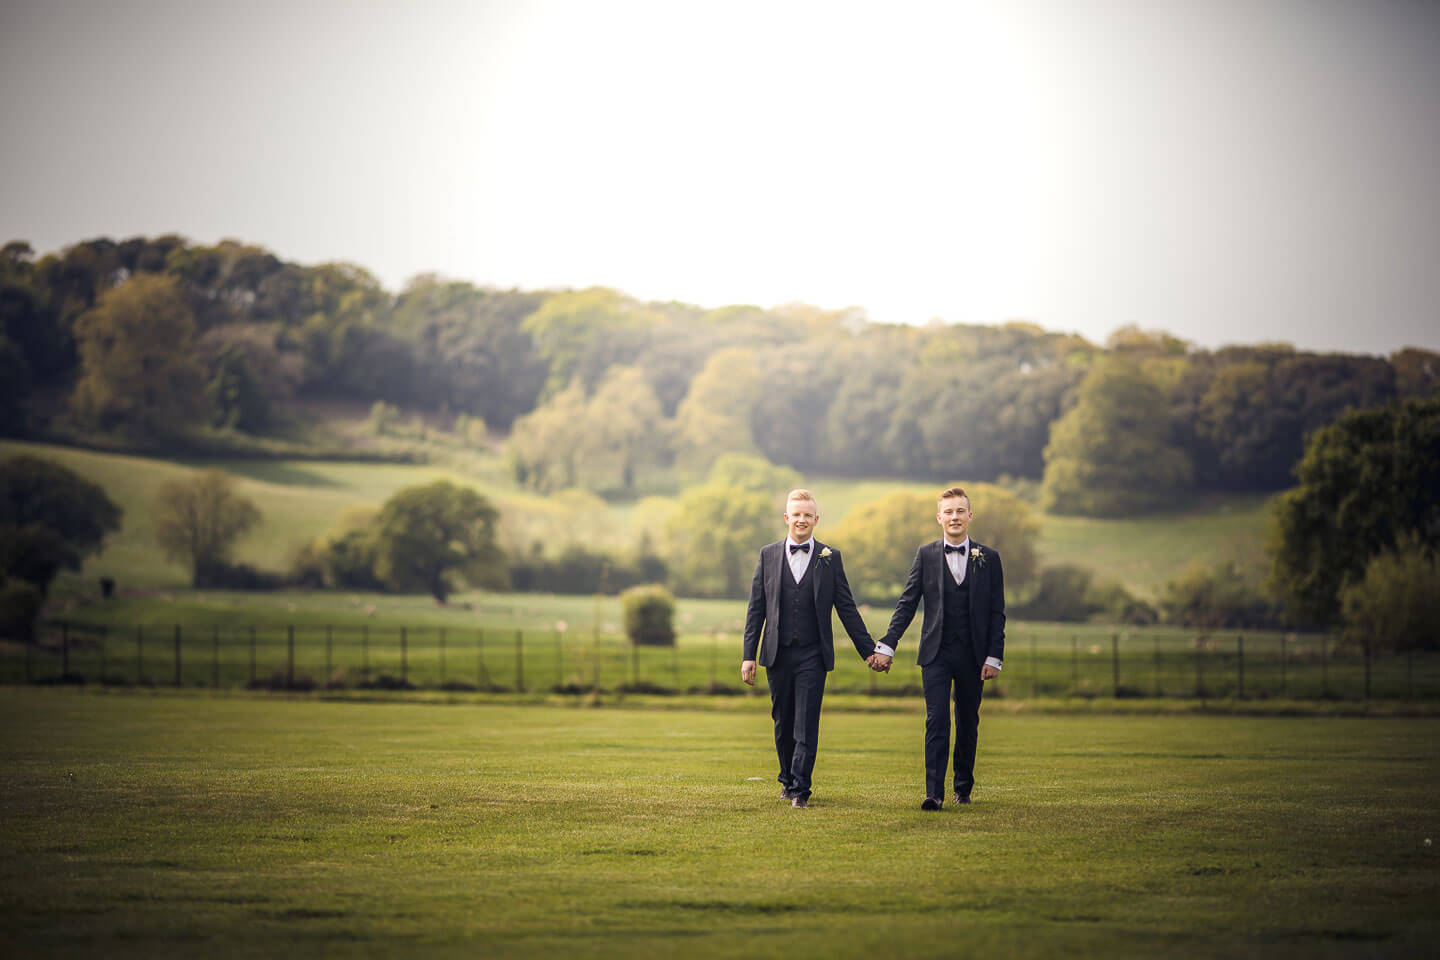 Sam and Kyle gay wedding photos walk across a field image copyright Shooting Pixels featured on The Gay Wedding Guide 3 5